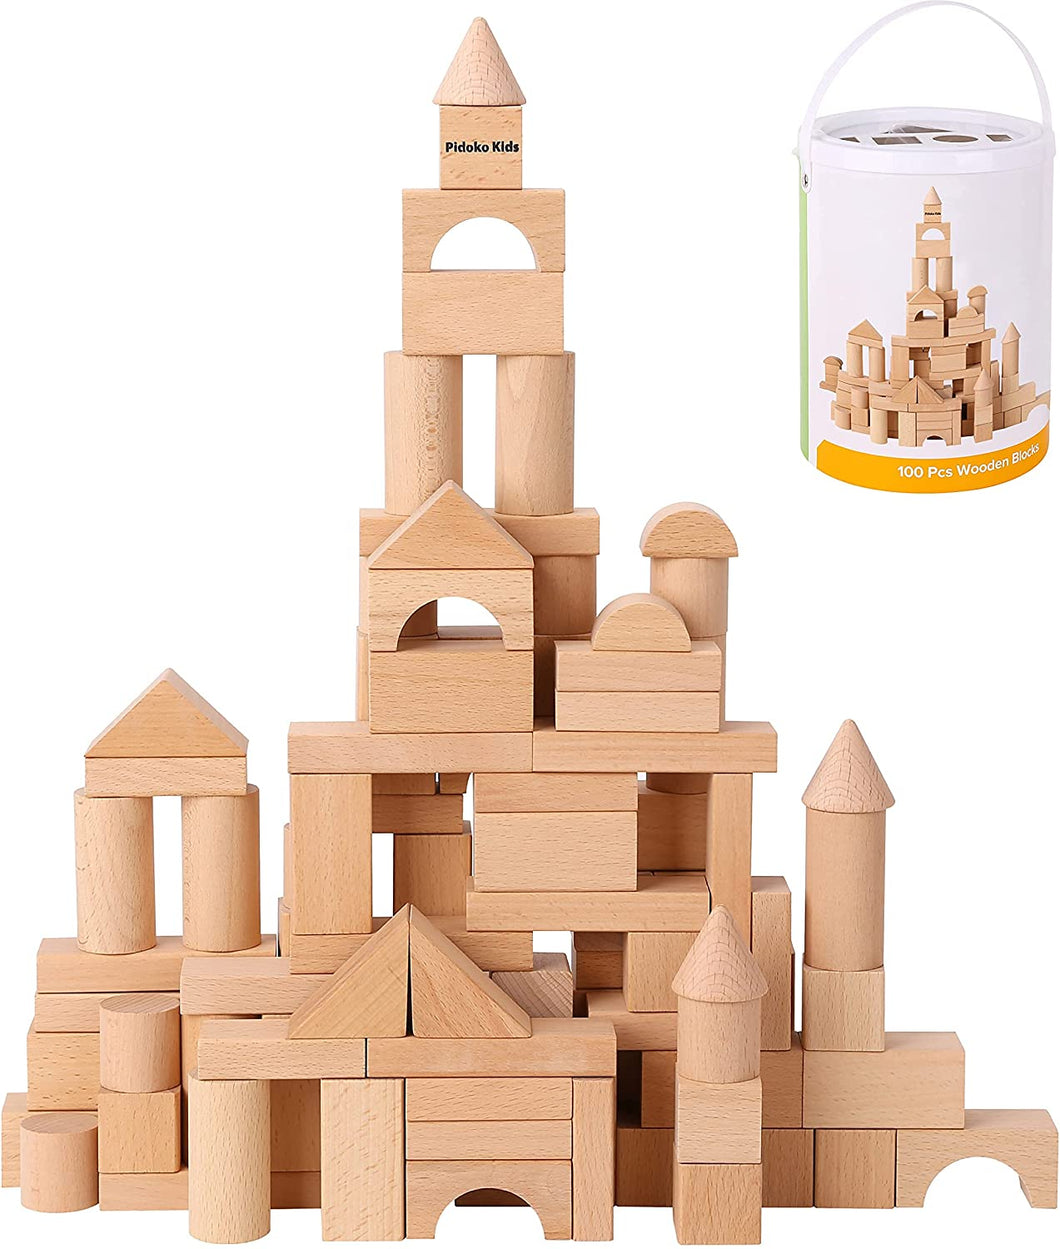 Wooden Building Blocks Set - 100 Pcs - Natural Beech Wood - Stacking Blocks with Storage Container